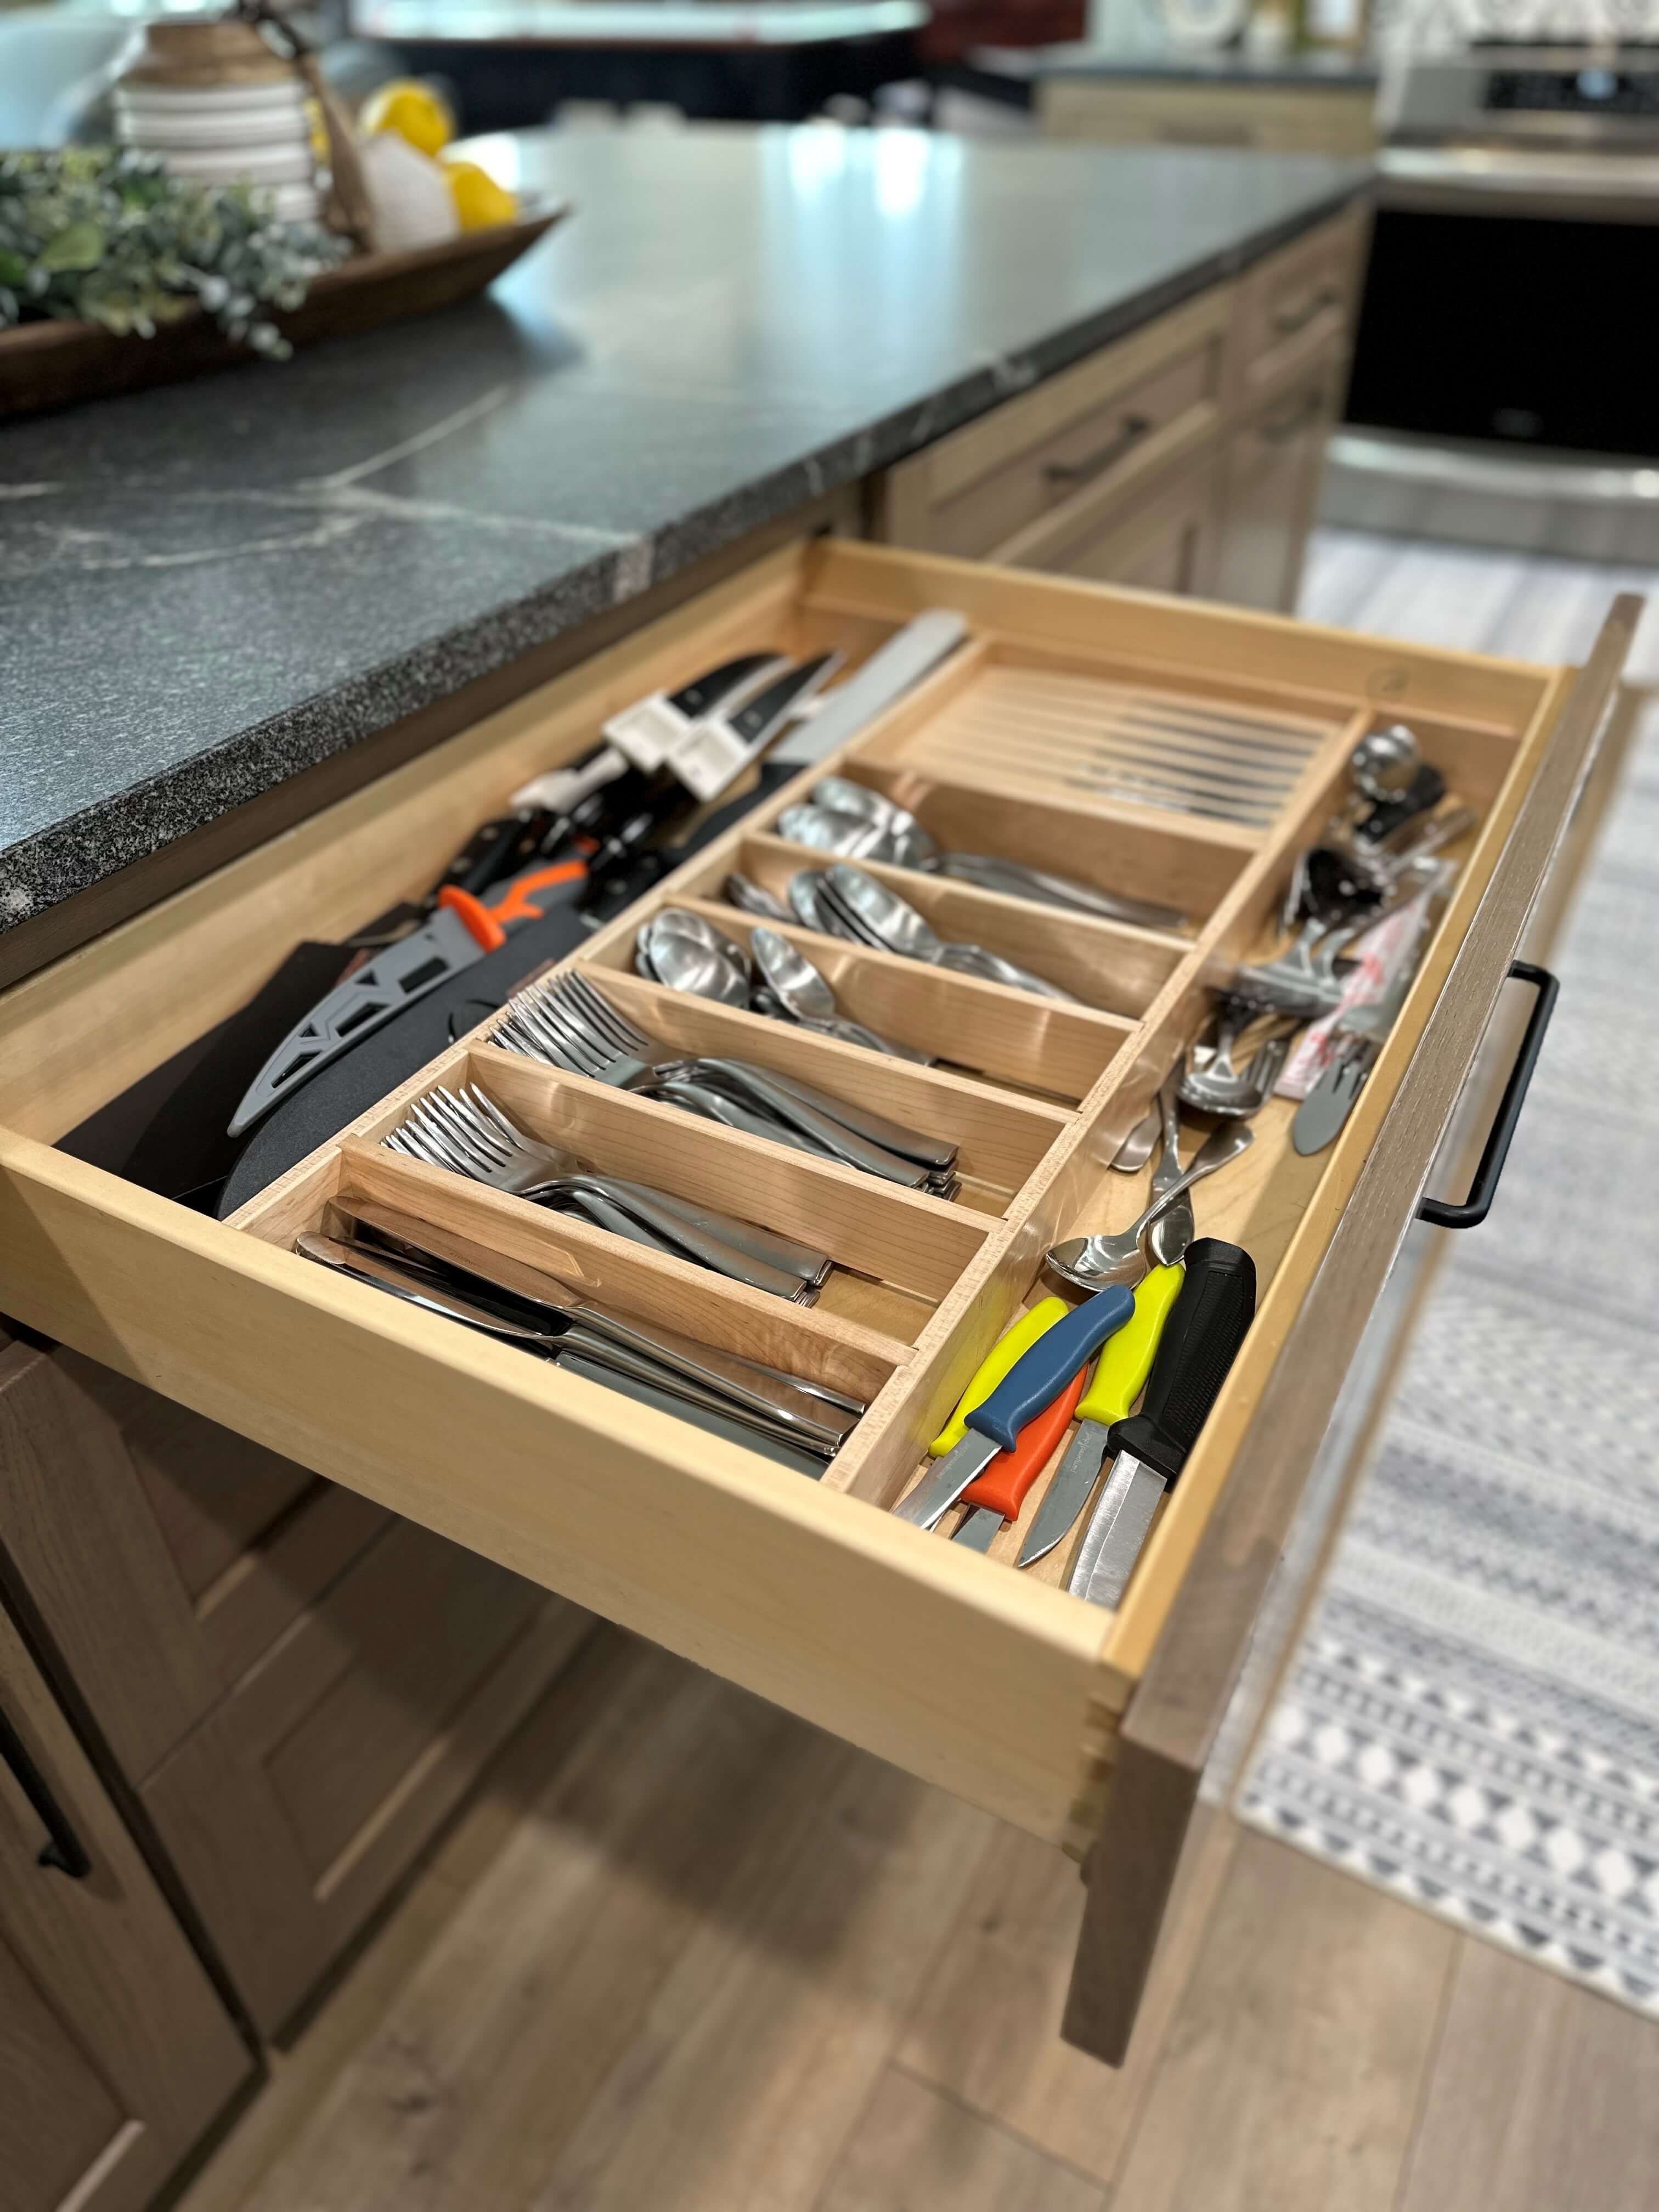 One of the top drawers in the kitchen island features a utensil organizer for storing the silverware collection as well as cutlery and extra kitchen gadgets.